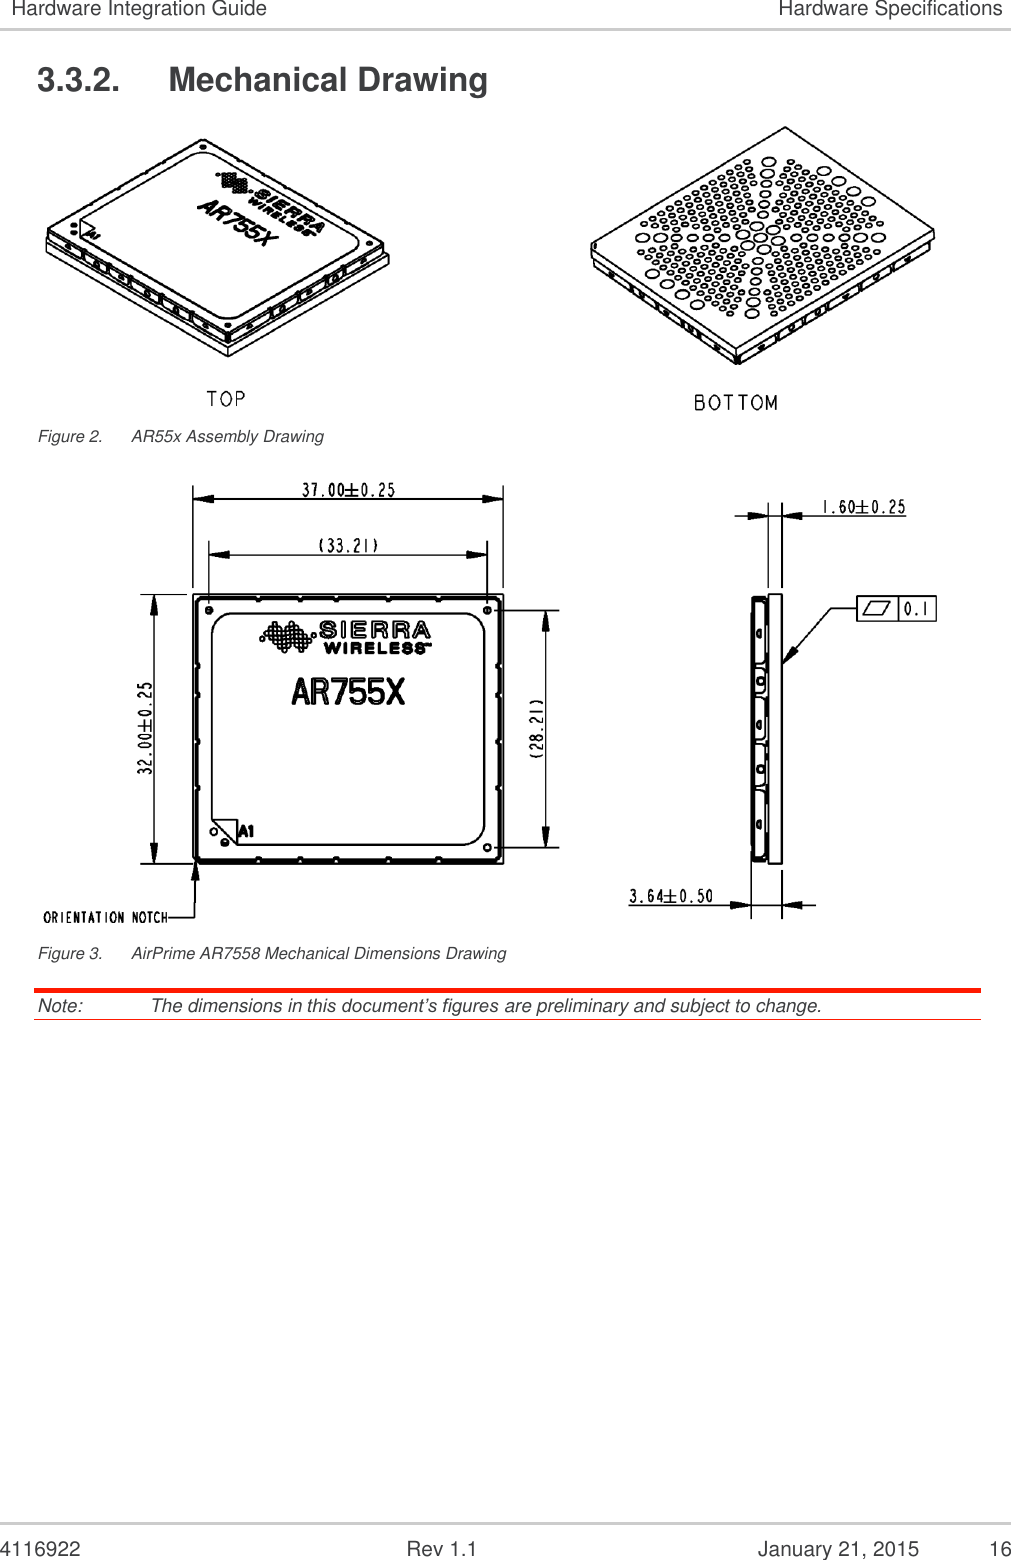   4116922              Rev 1.1          January 21, 2015  16 Hardware Integration Guide Hardware Specifications 3.3.2.  Mechanical Drawing  Figure 2.  AR55x Assembly Drawing  Figure 3.  AirPrime AR7558 Mechanical Dimensions Drawing Note:   The dimensions in this document’s figures are preliminary and subject to change.   